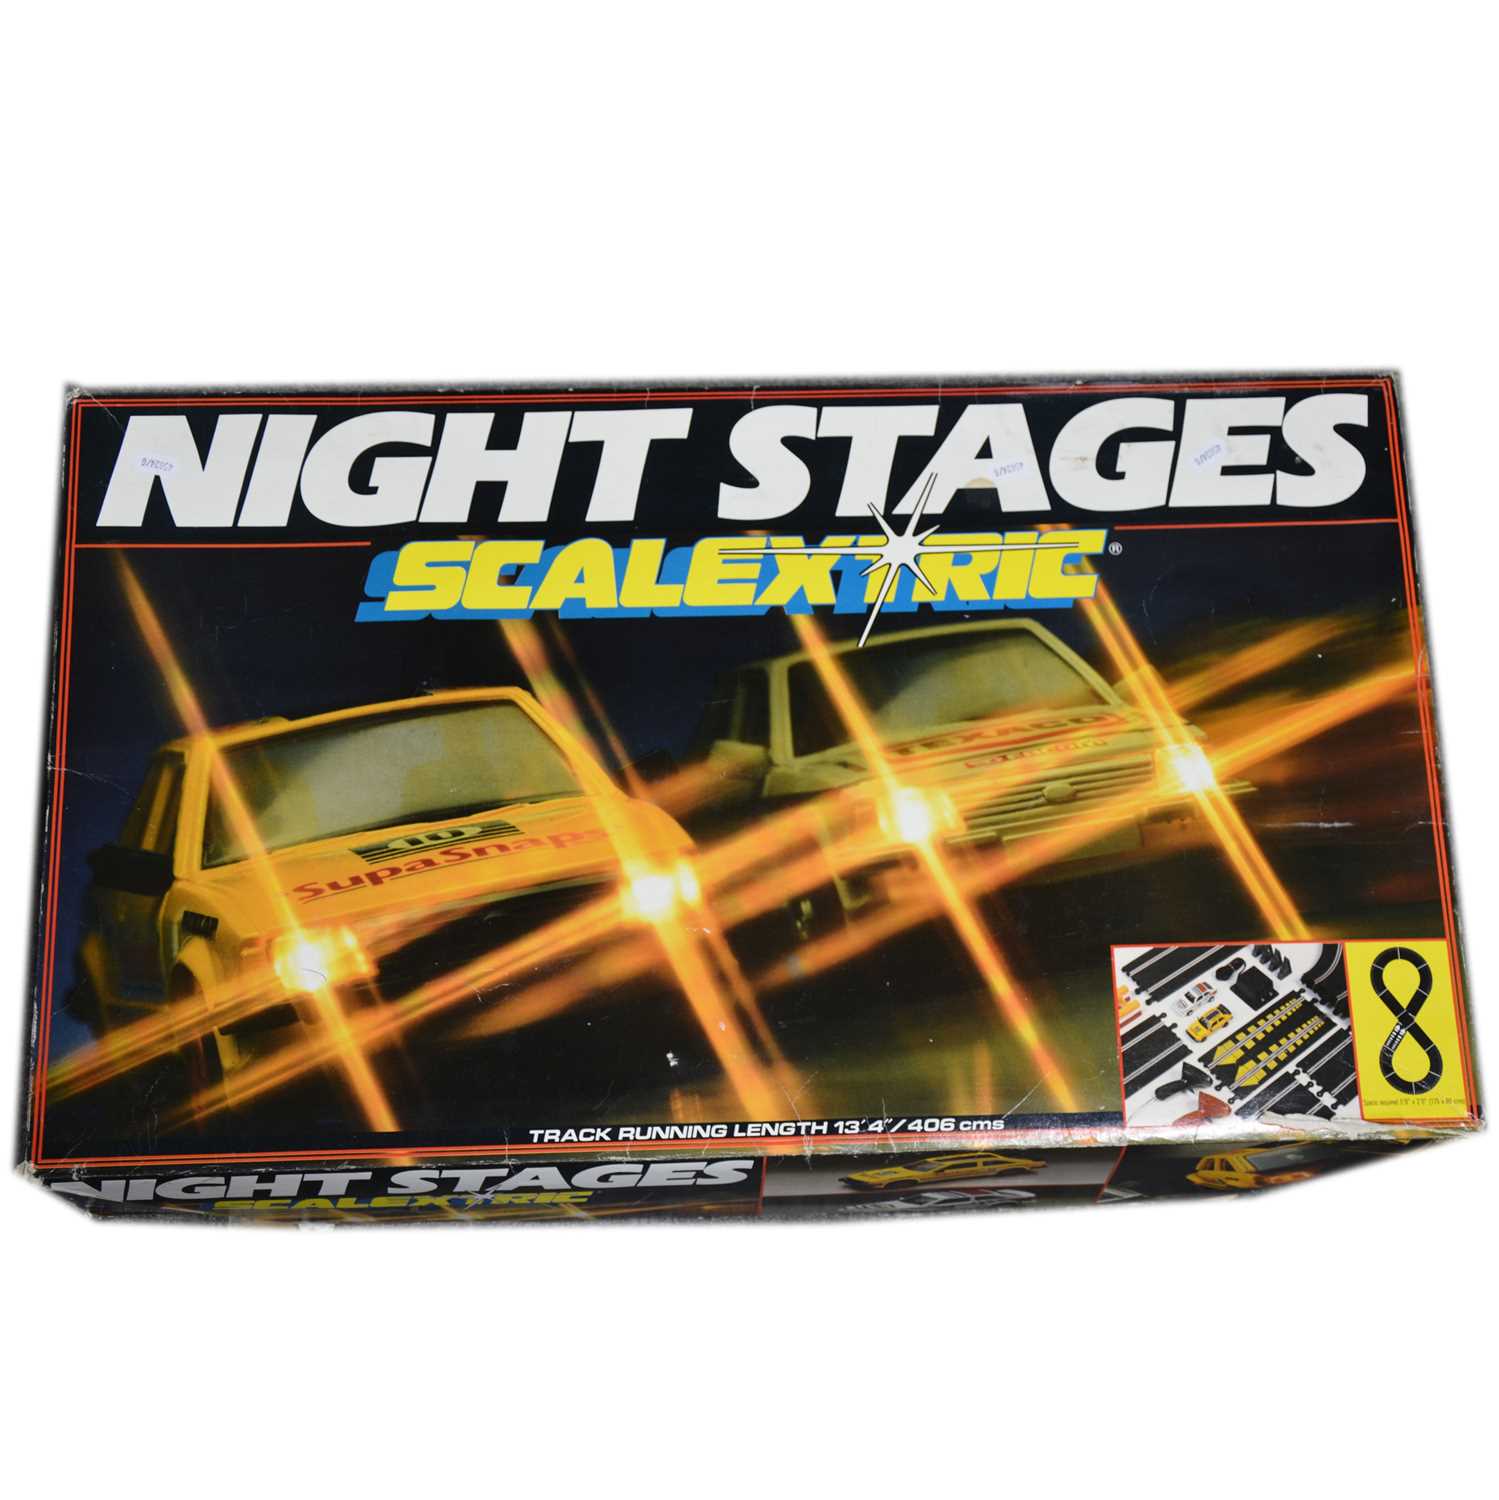 Lot 197 - Scalextric model slot-car racing set Night Stages, boxed.